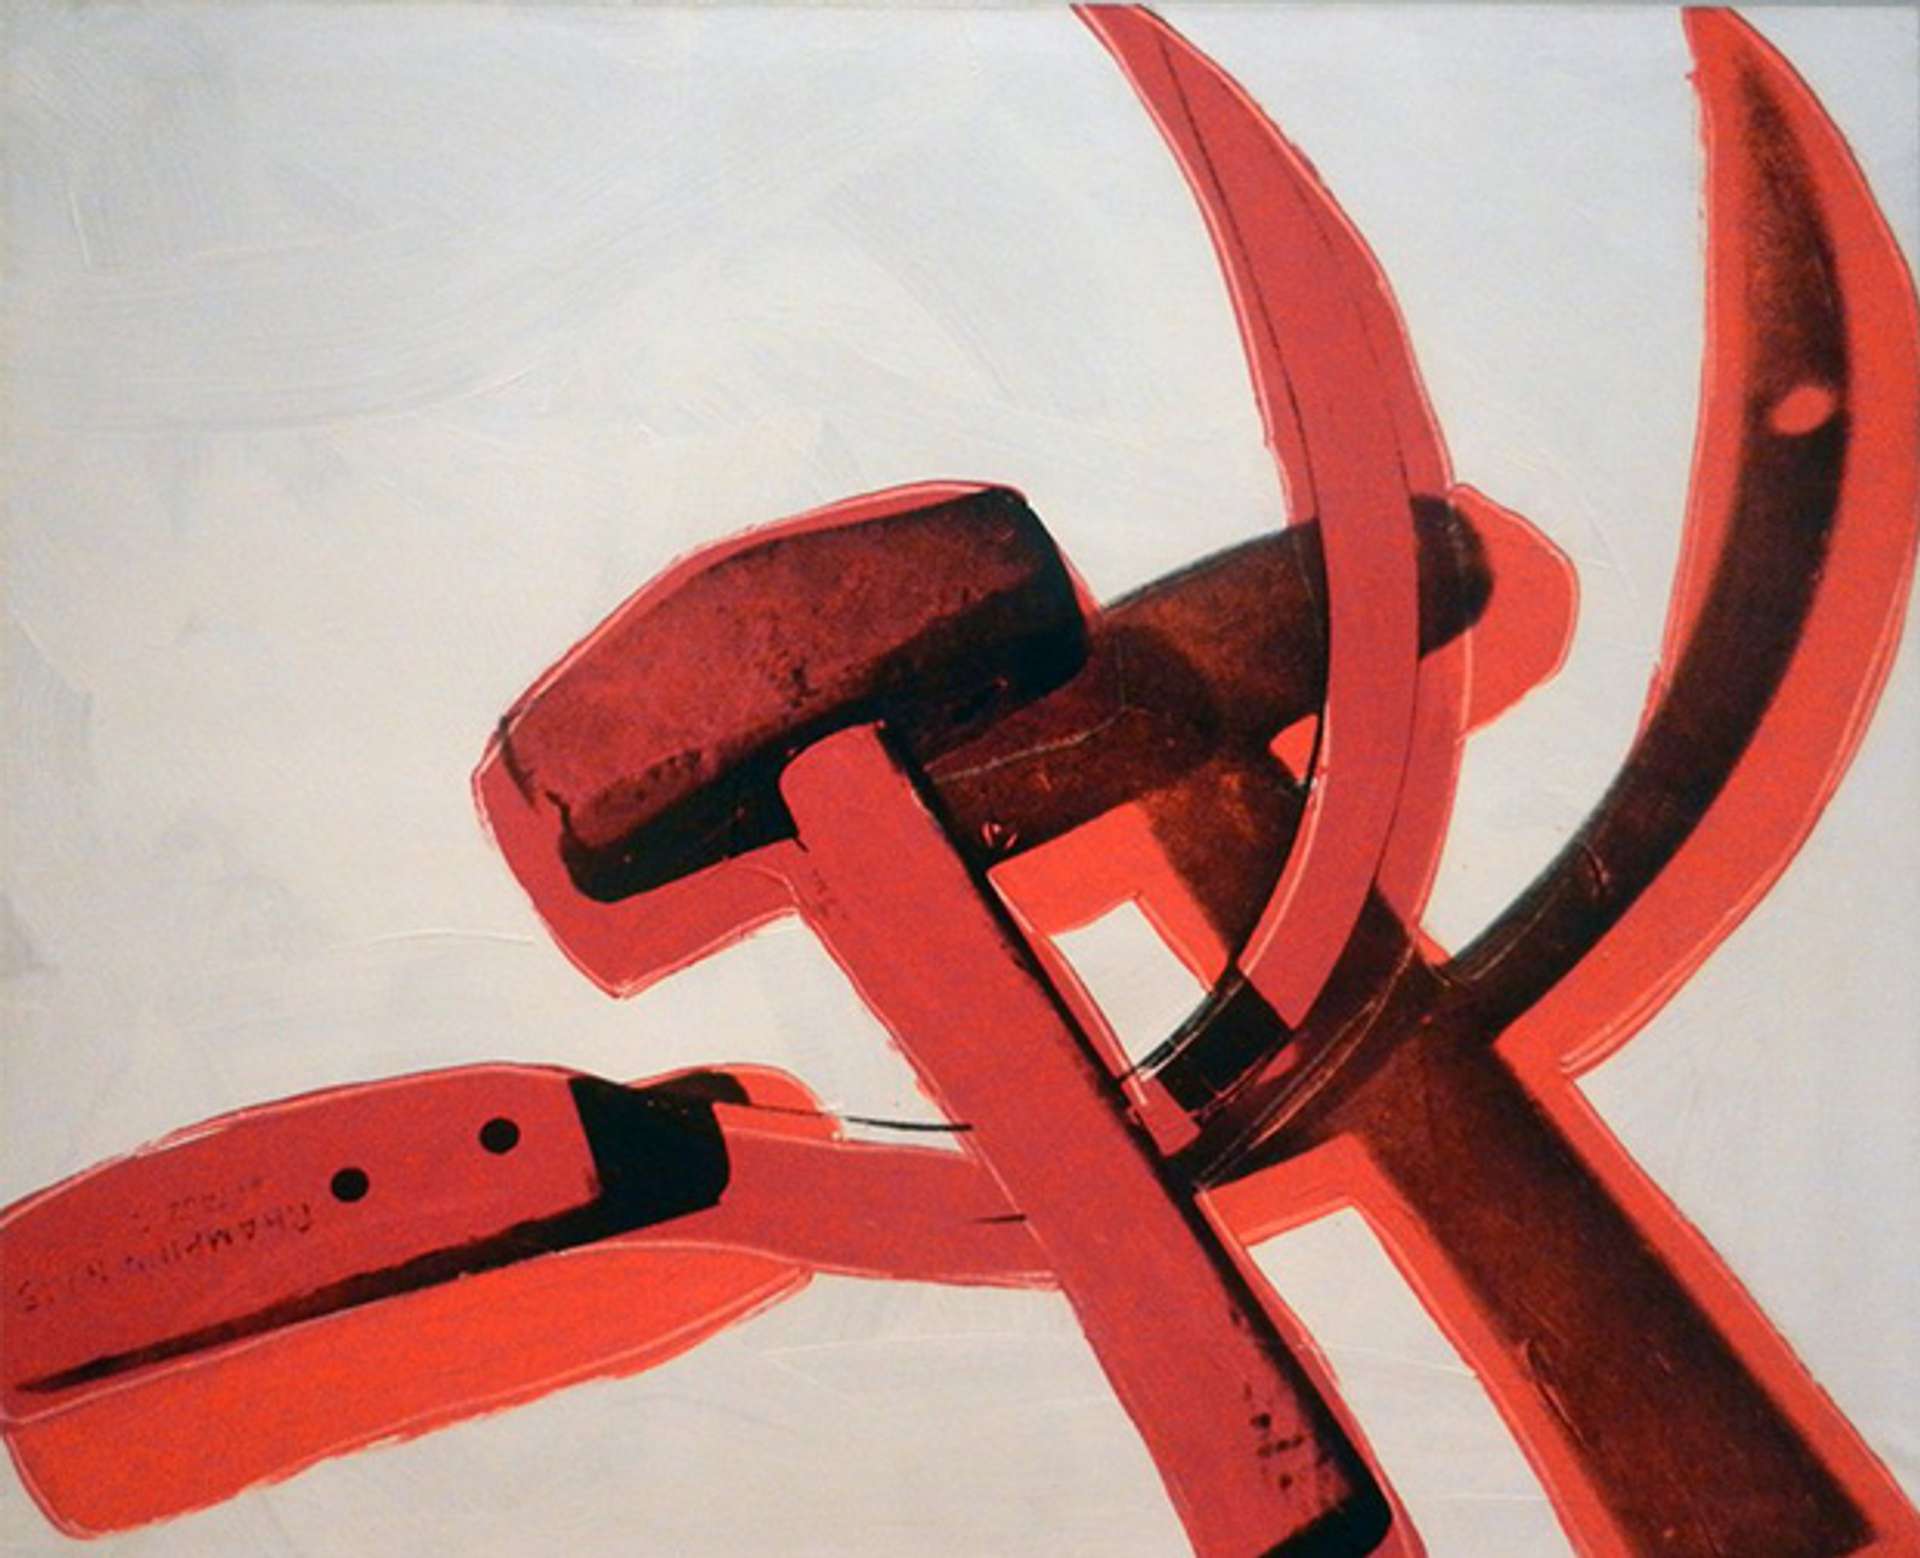 Image © Phaidon / Hammer And Sickle by Andy Warhol - MyArtBroker